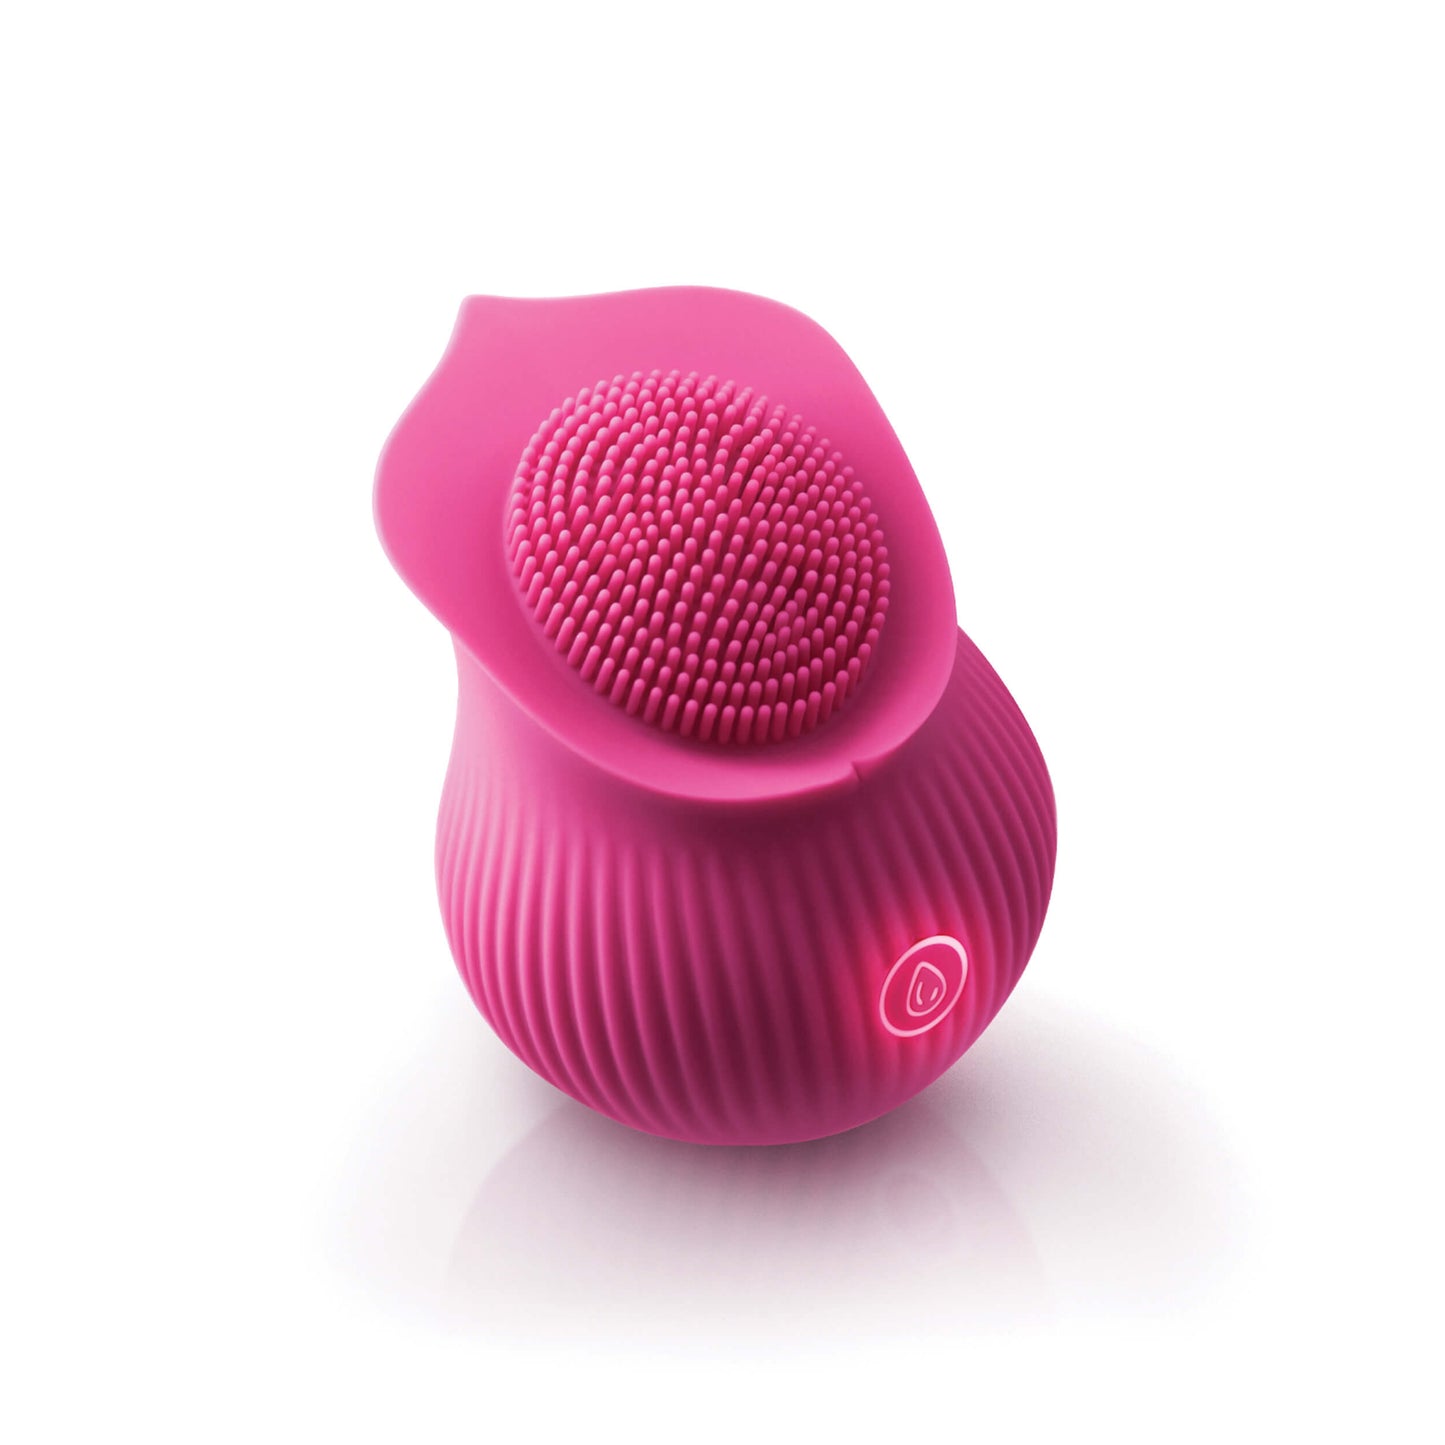 Inya The Bloom Vibrator in pink - by The Bigger O - an online sex toy shop. We ship to USA, Canada and the UK.